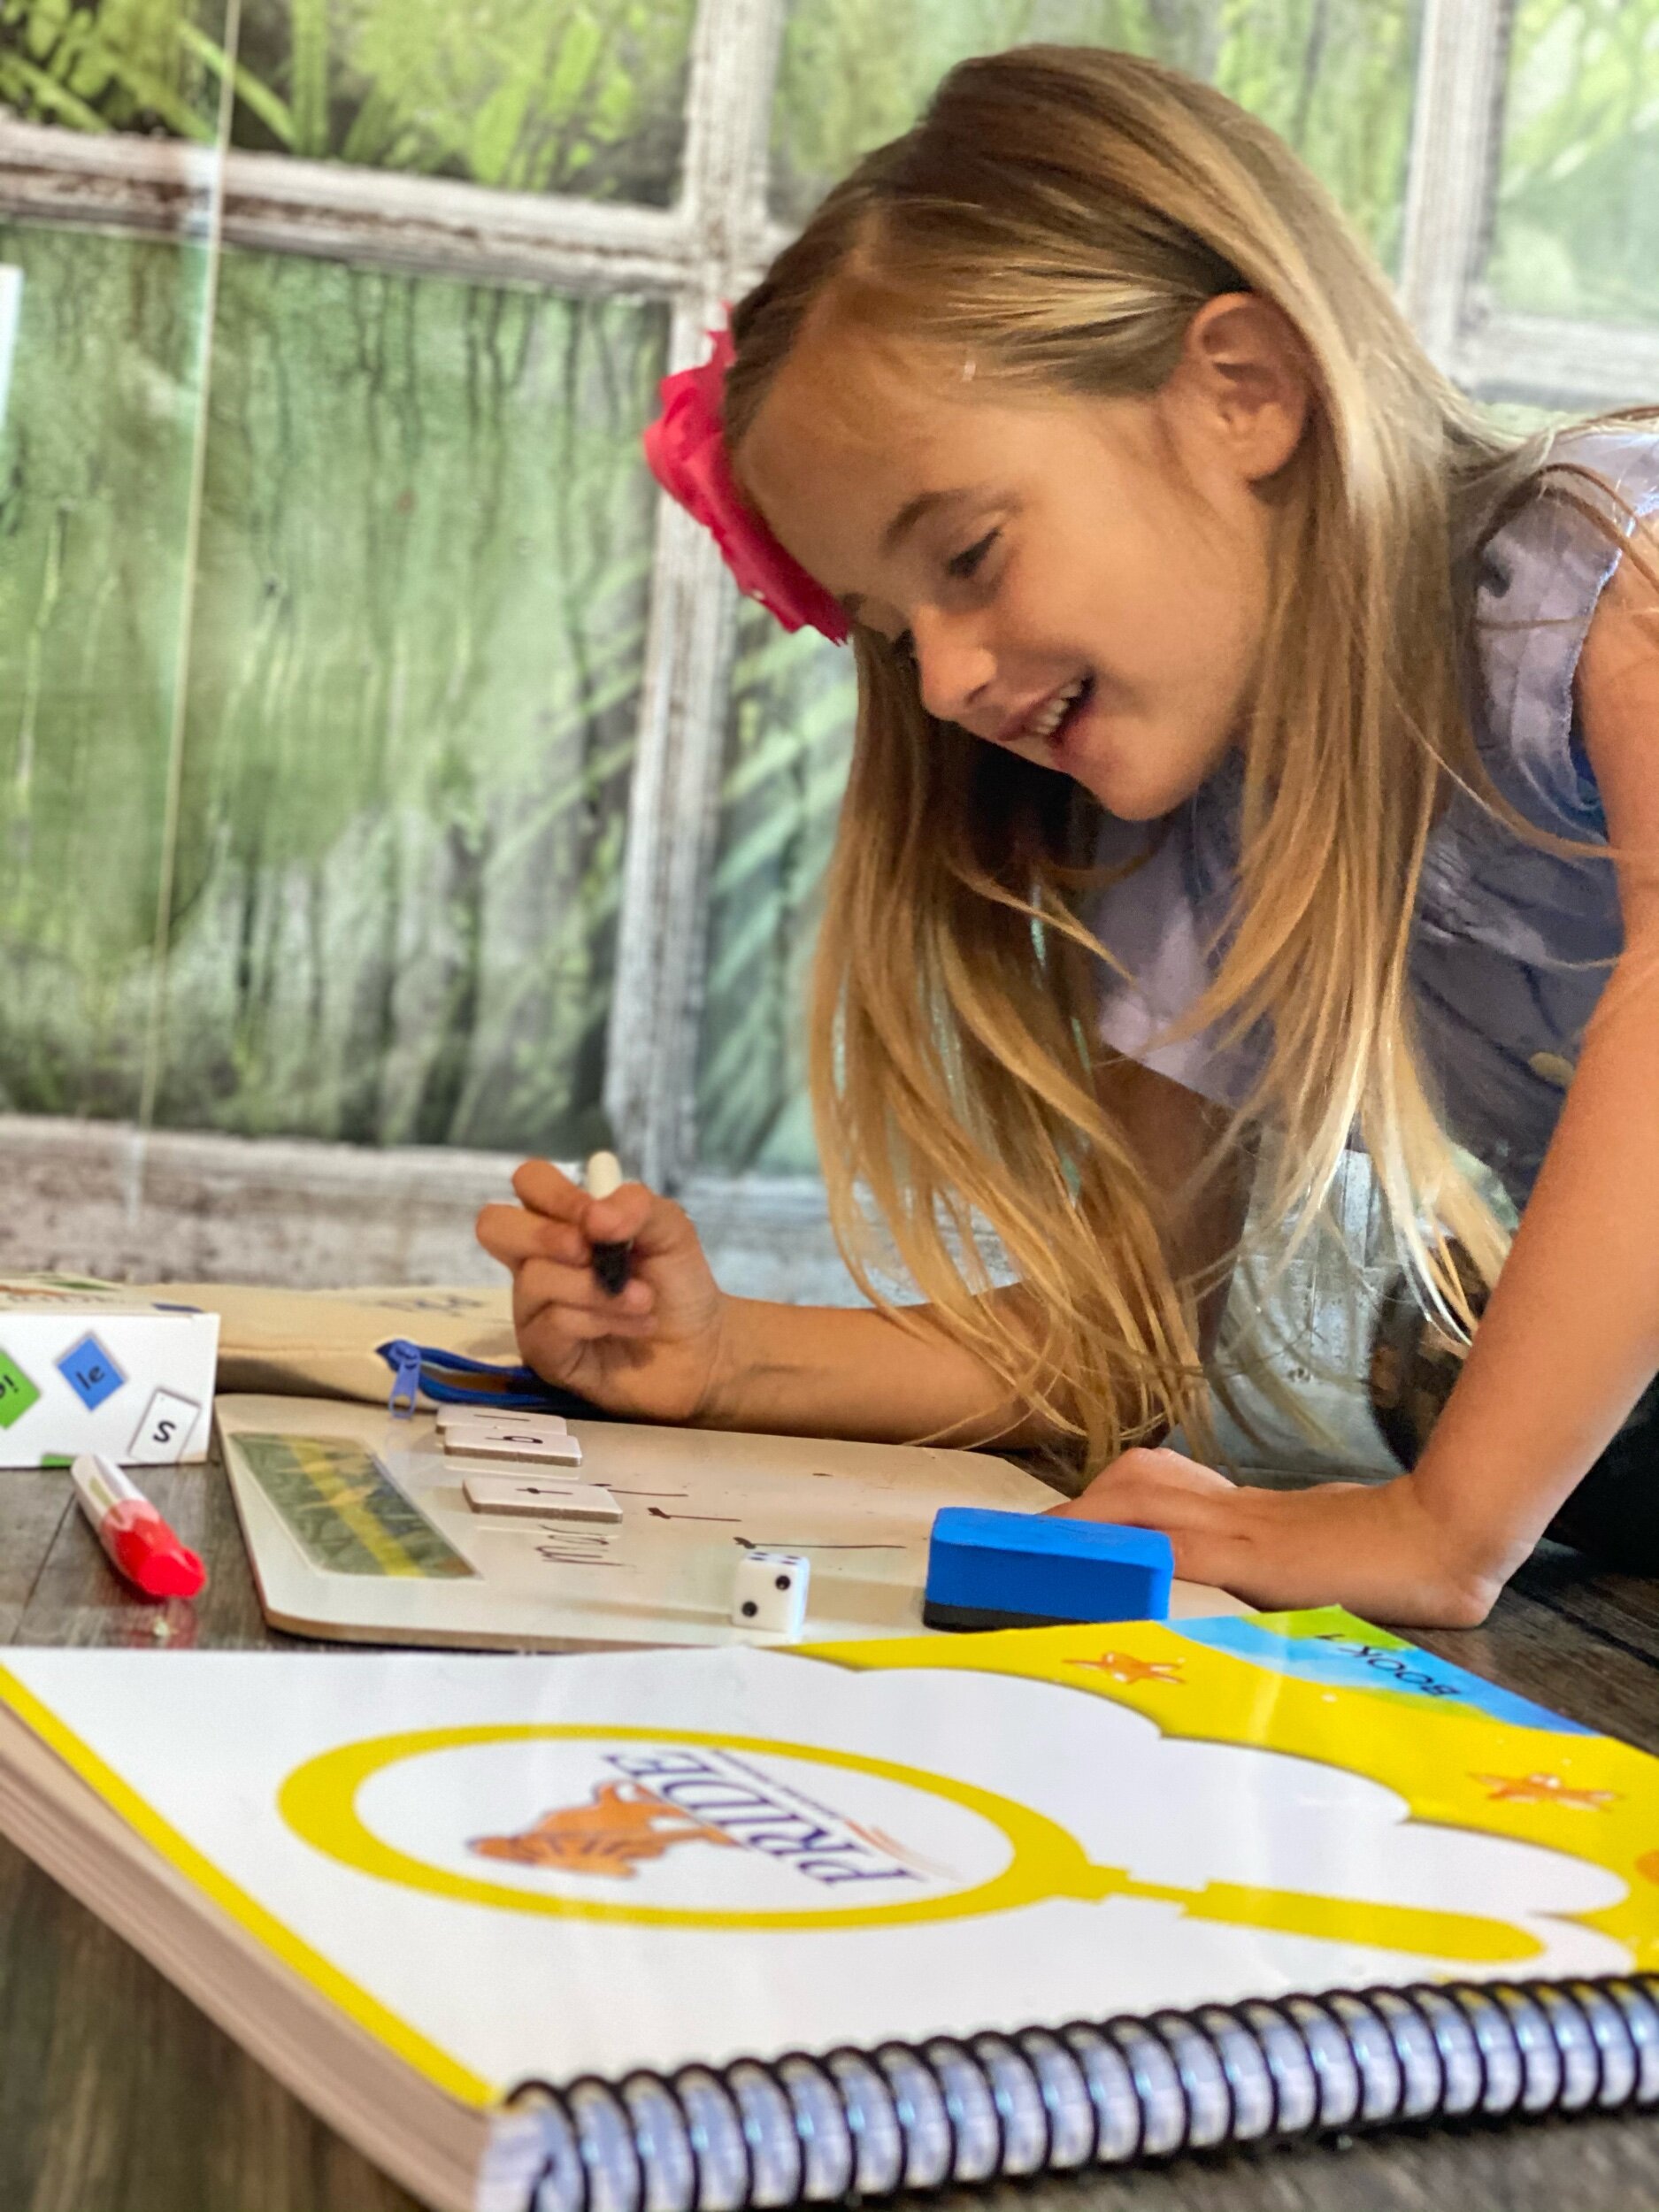  The PRIDE activity kit is a modern version of Maria Montessori’s chalkboard work and serves the same direct aim of hand-eye coordination and fine motor skills in writing. 